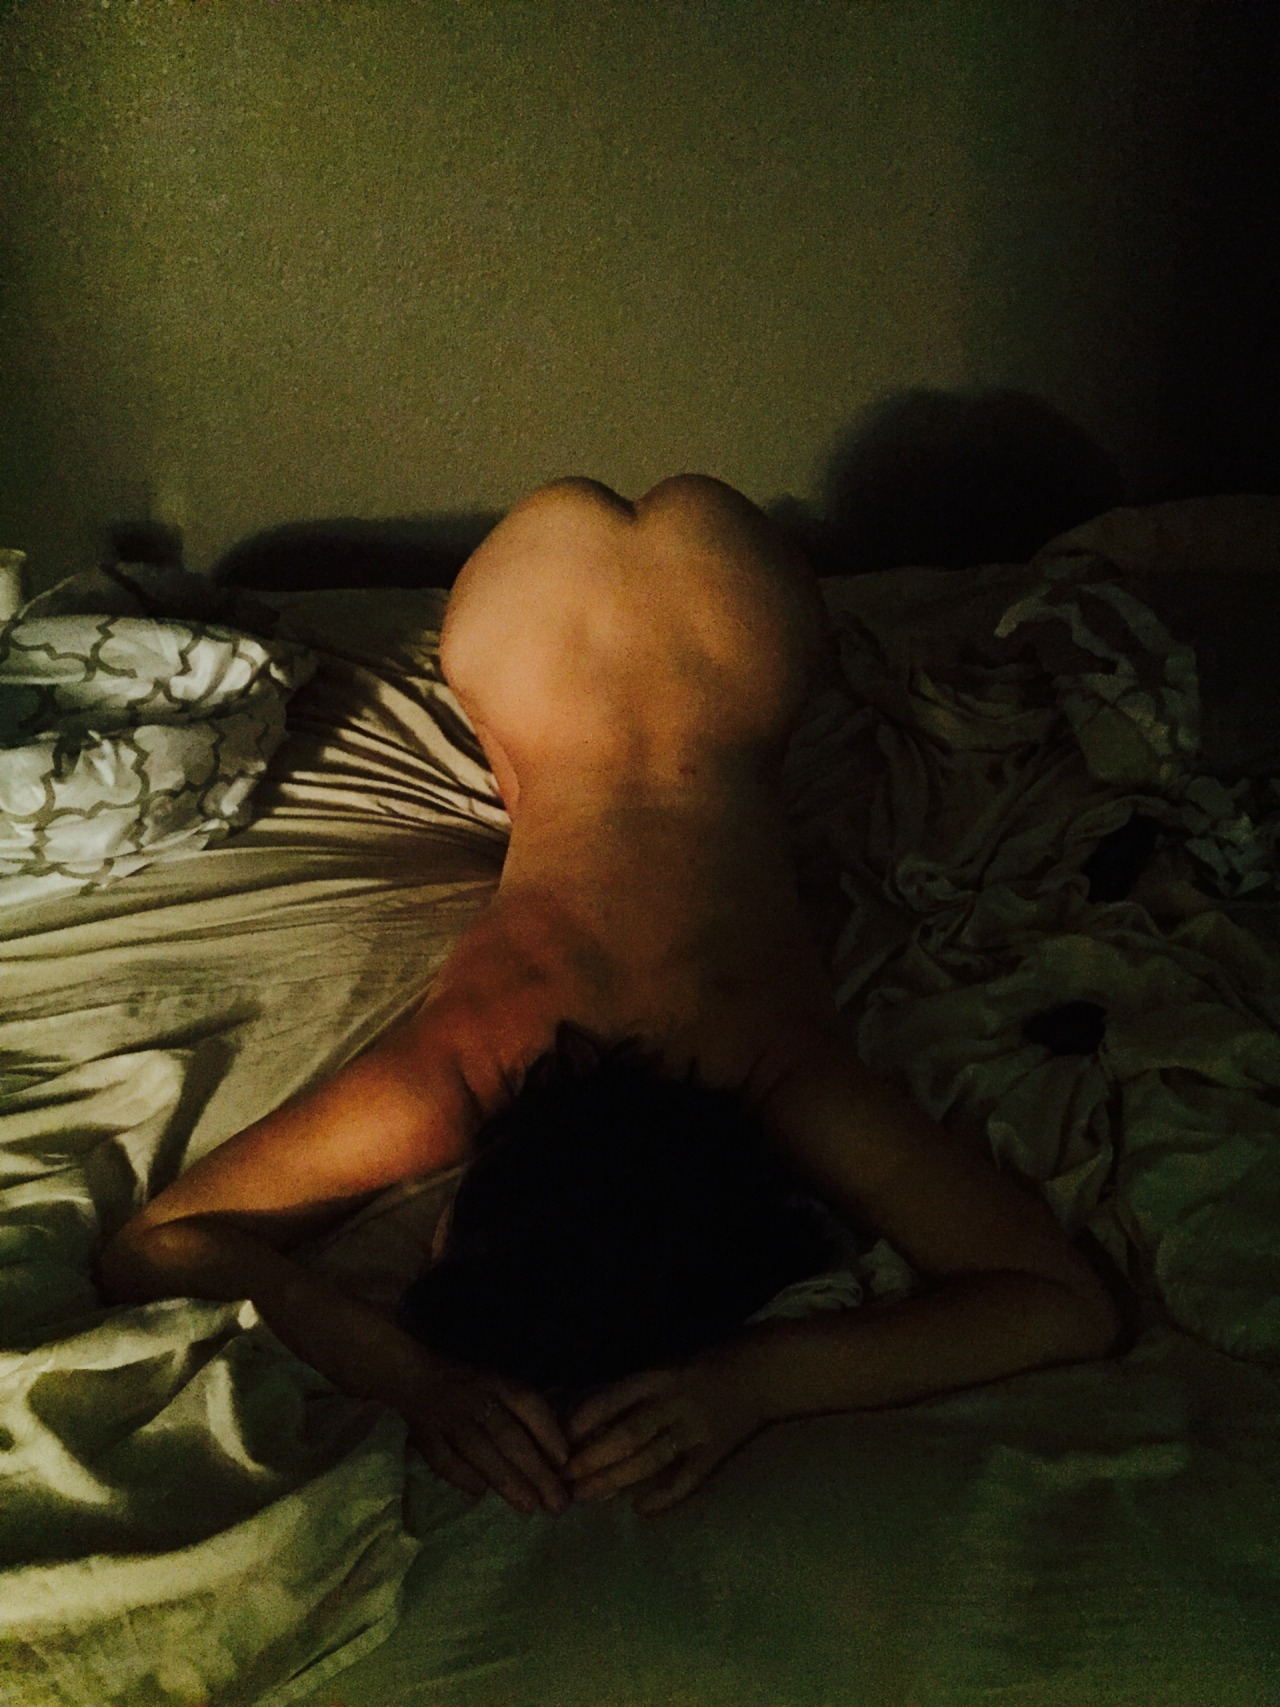 okcwifeshare:  Three hours later. She still needs more dick.  ~him